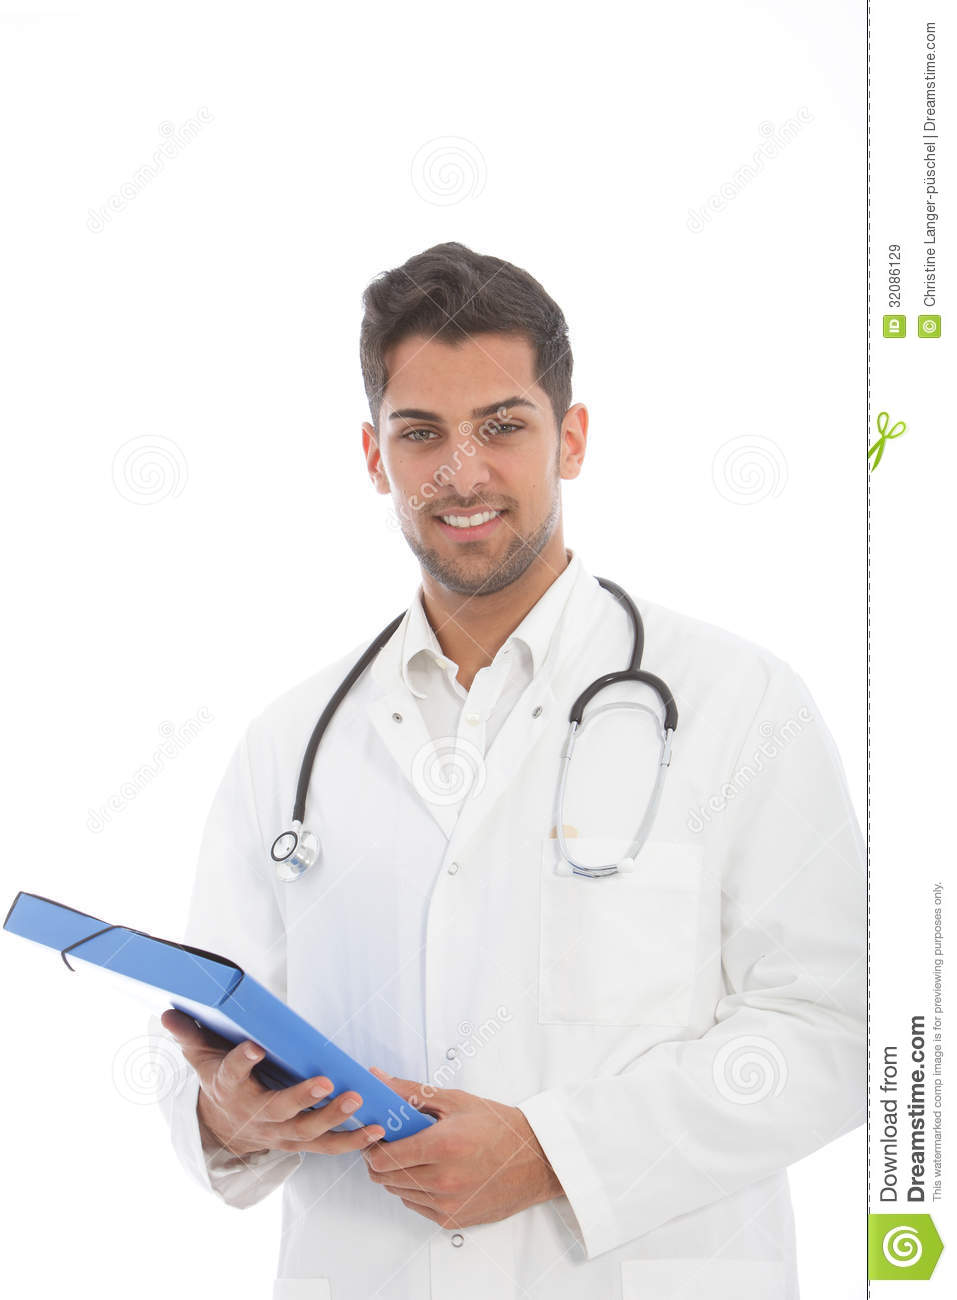 Handsome Male Doctor With A File Royalty Free Stock Images   Image    